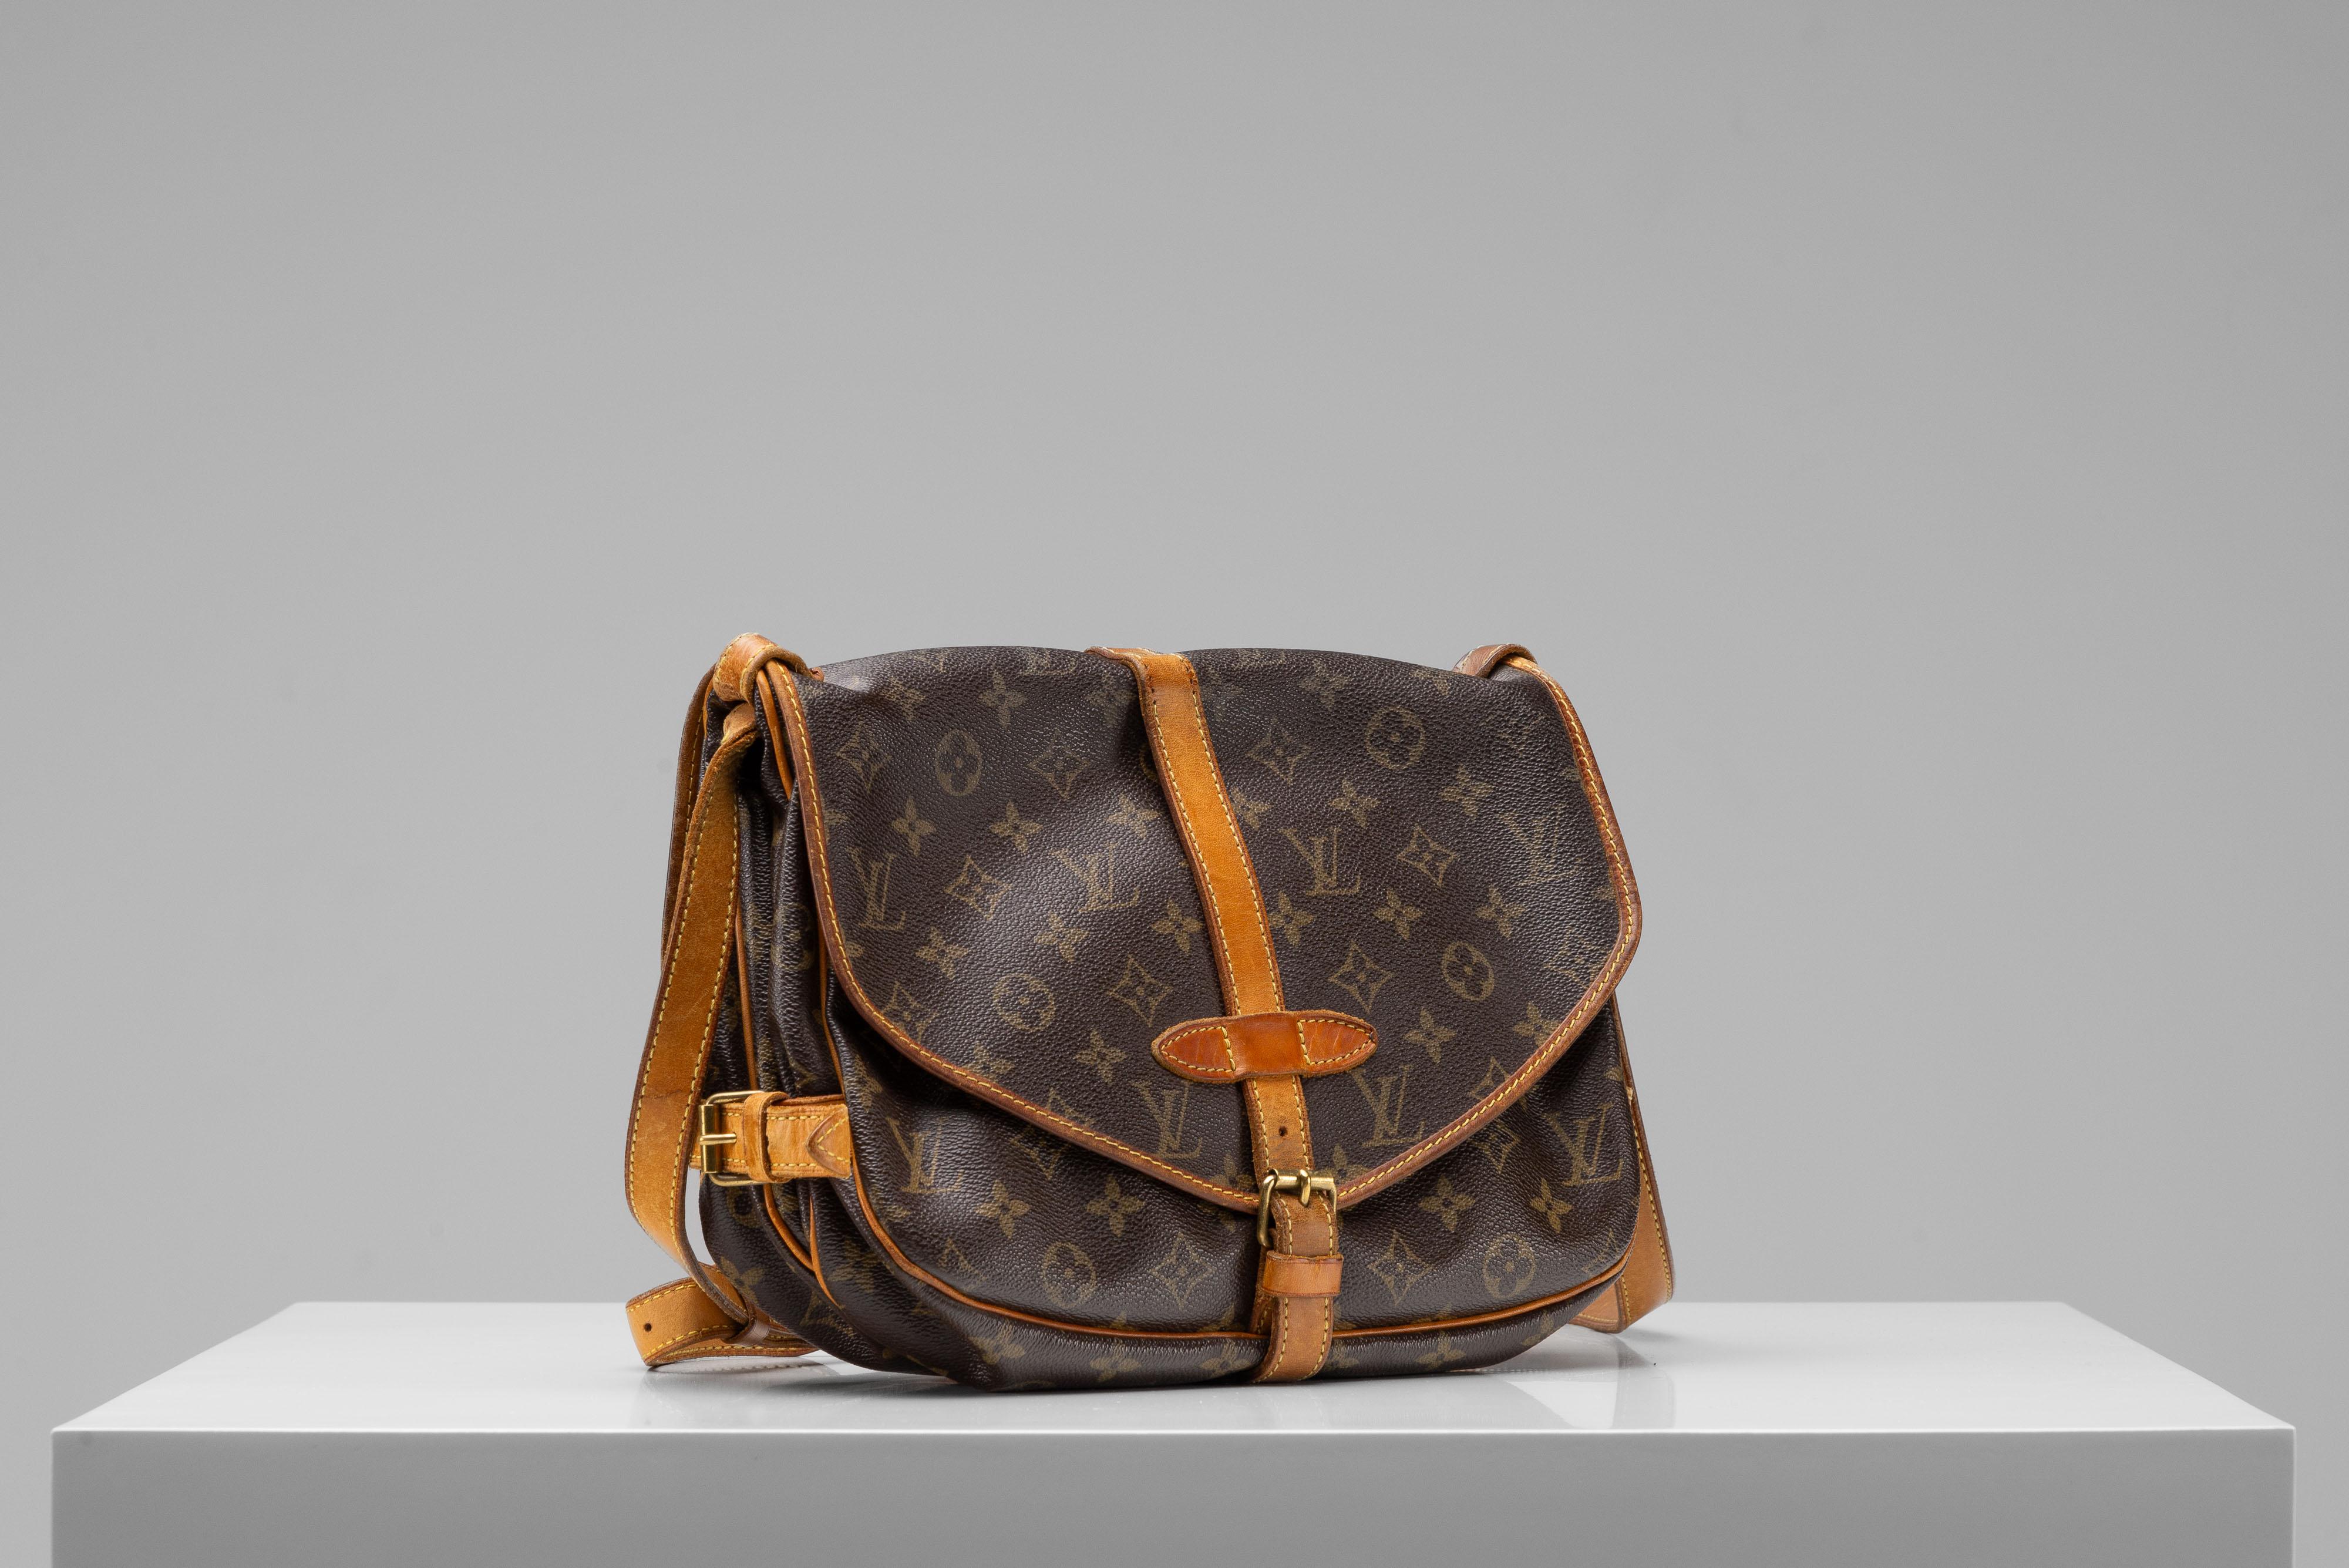 From the collection of SAVINETI we offer this Louis Vuitton Saumur:
-    Brand: Louis Vuitton
-    Model: Saumur 
-    Year: 2006
-    Condition: Good Vintage Condition
-    Materials: monogram canvas, leather

Authenticity is our core value at